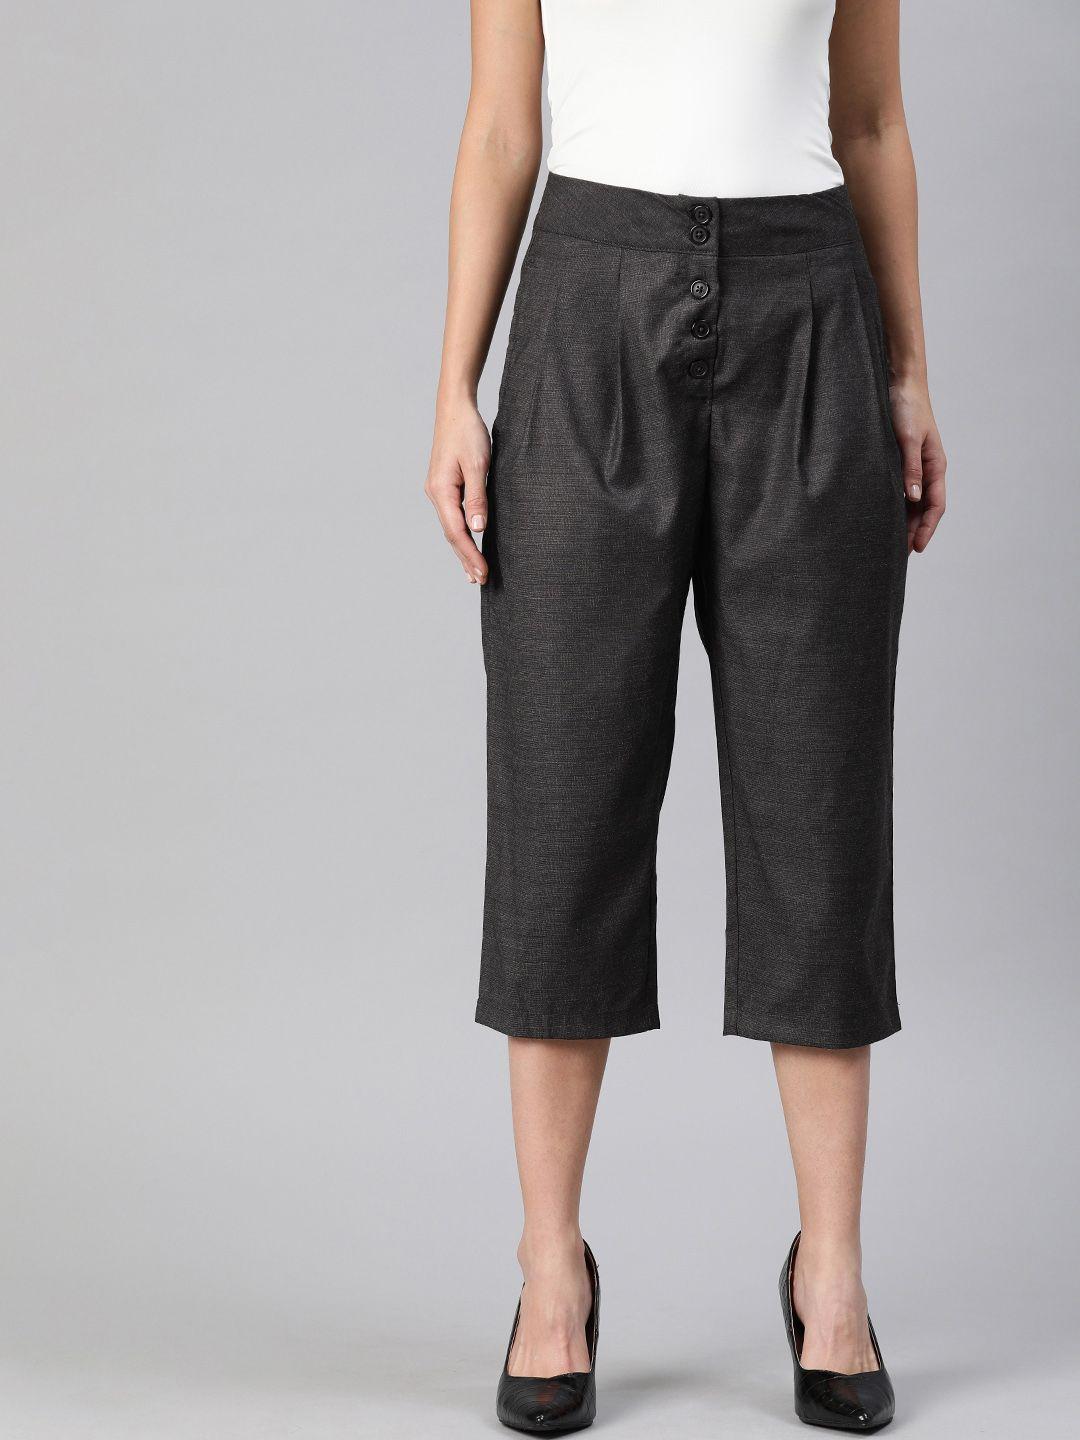 here&now women charcoal grey regular fit solid regular three-fourth trousers